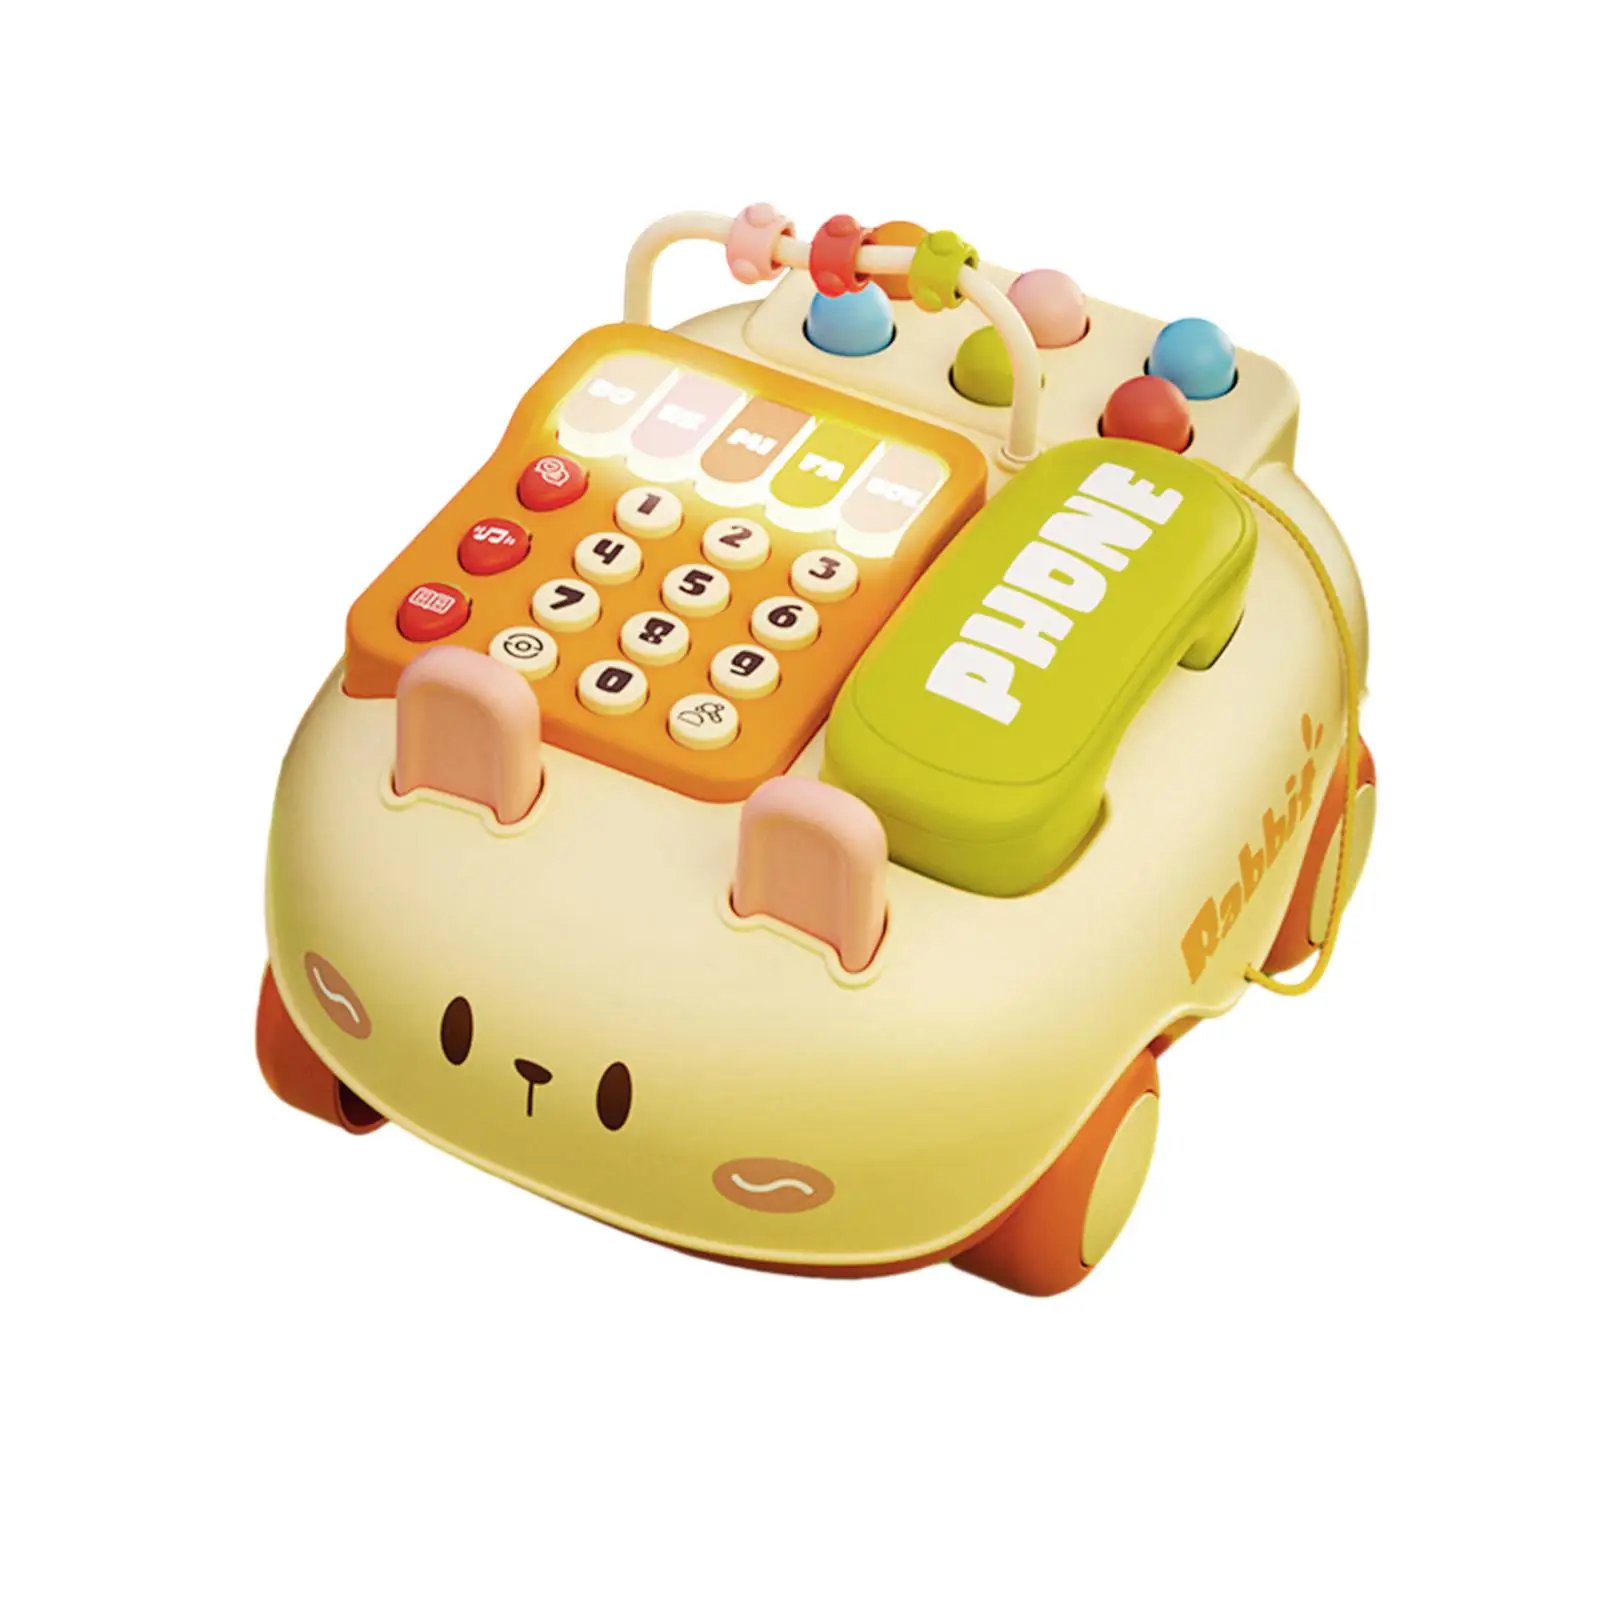 Baby Telephone Toy with Music and Lights Educational Toy Game Parent Child Interactive Toy for Boys Kids Baby Interactive Toy